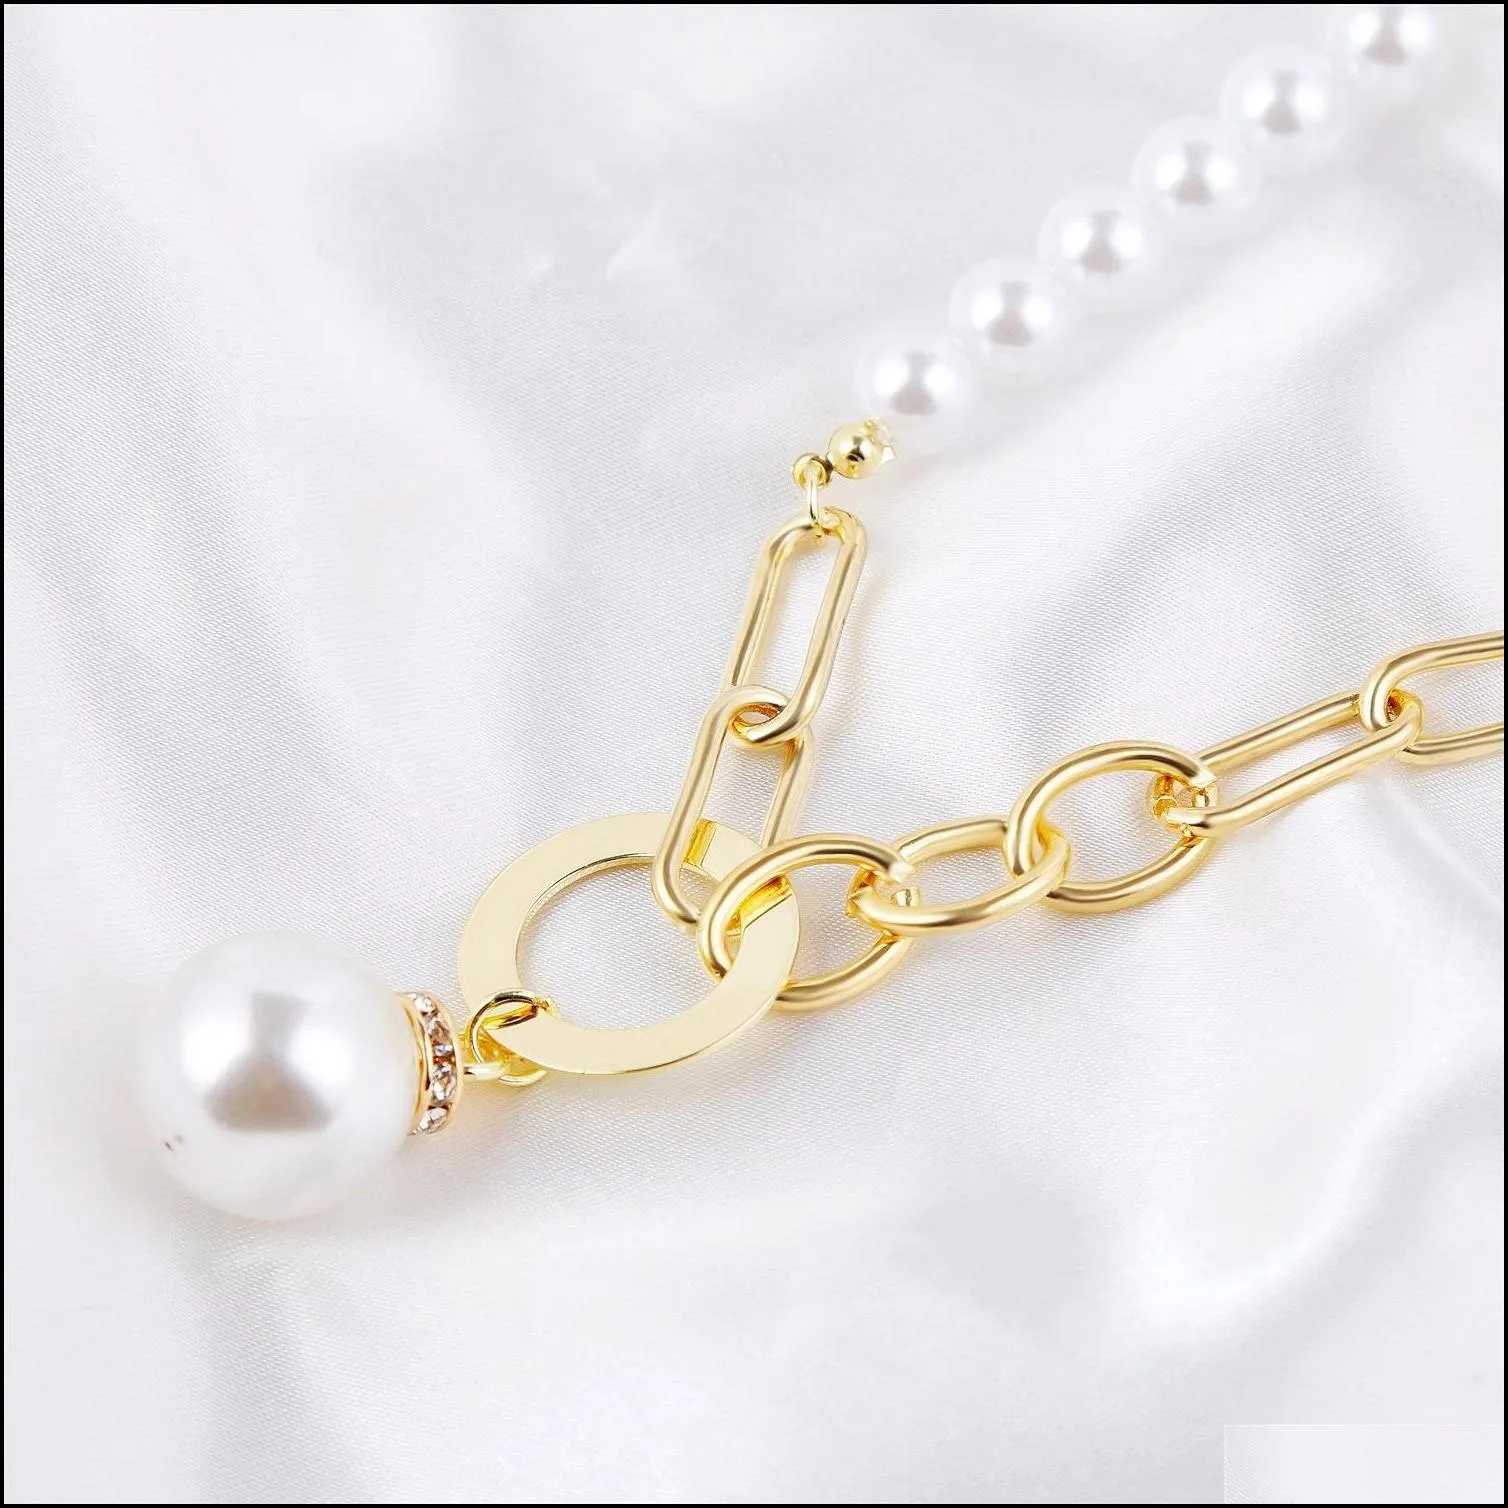 vintage pearls chain choker necklaces for women baroque style jewelry three layer coins heart pearl pendant chokers fashion necklace